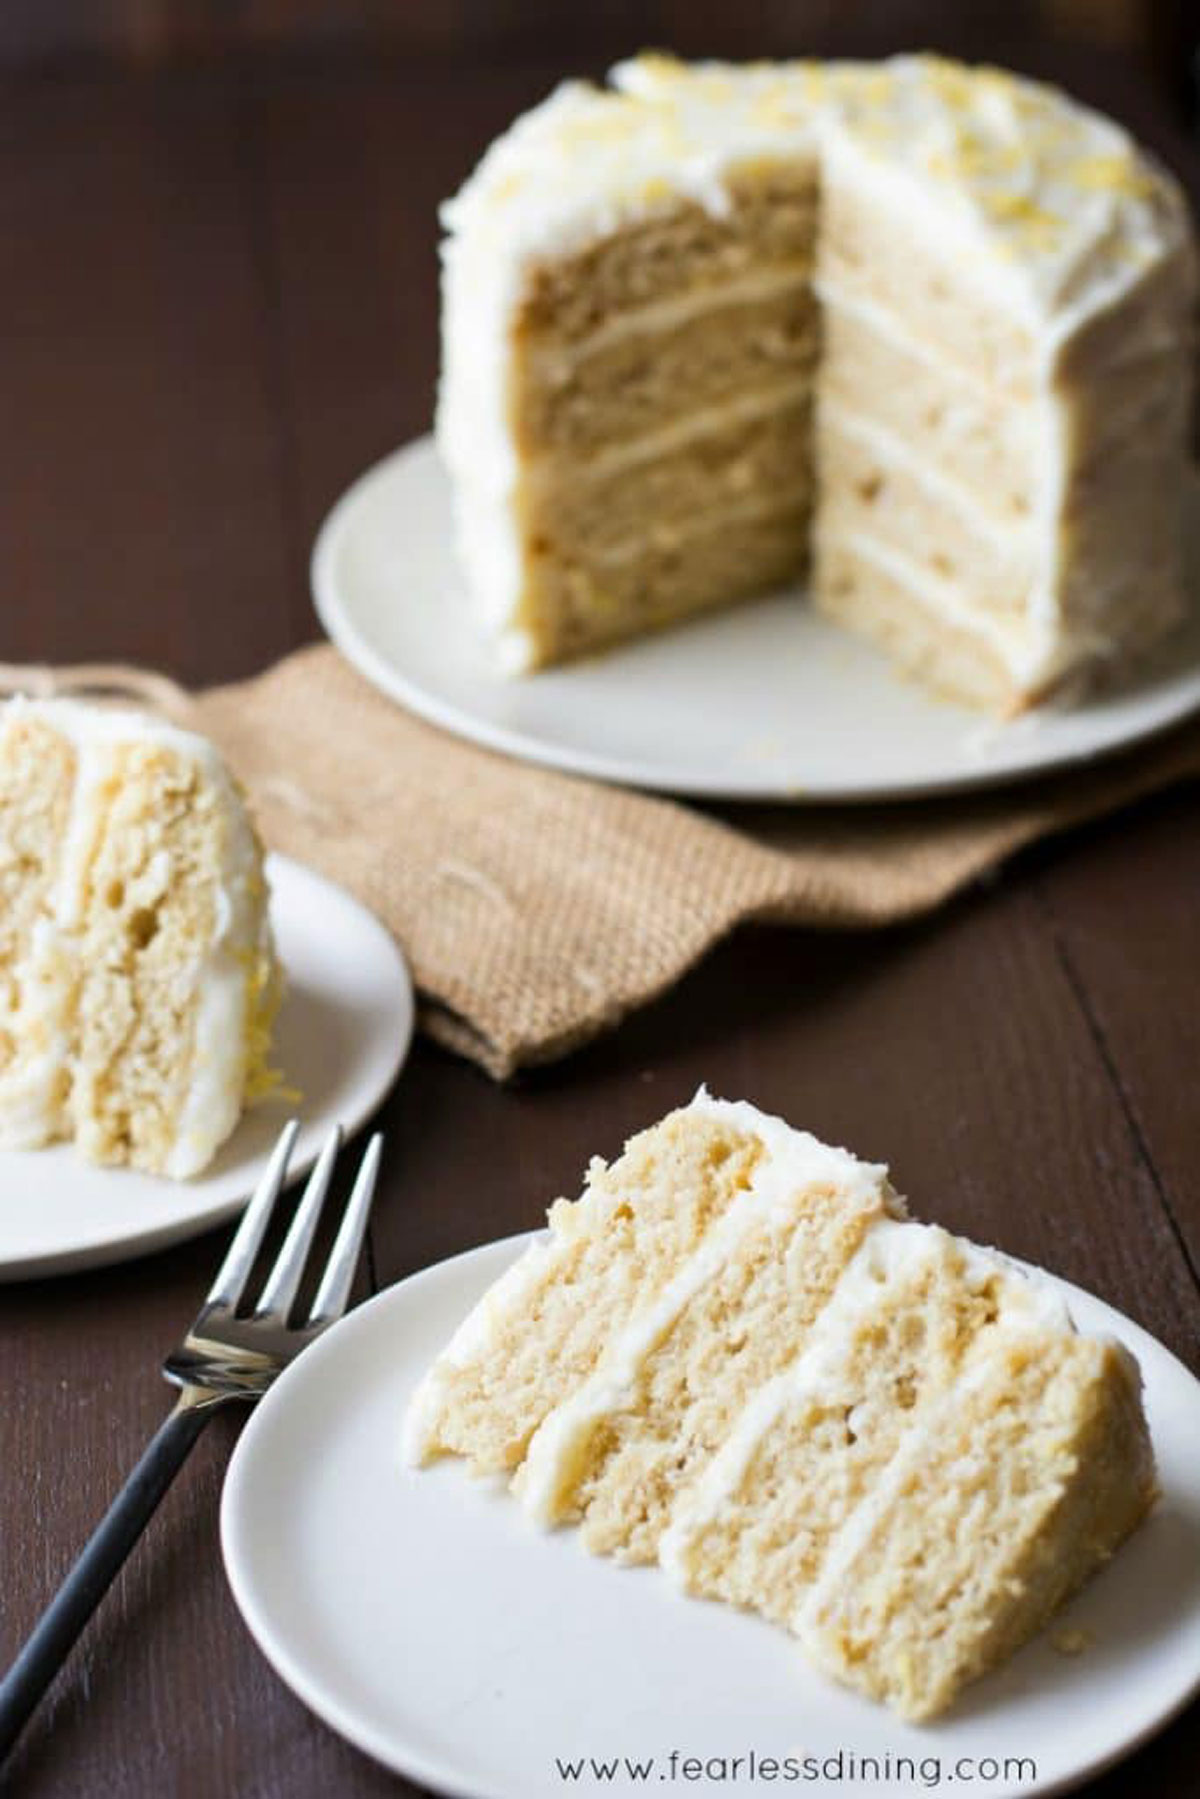 Two slices of lemon cake on plates.